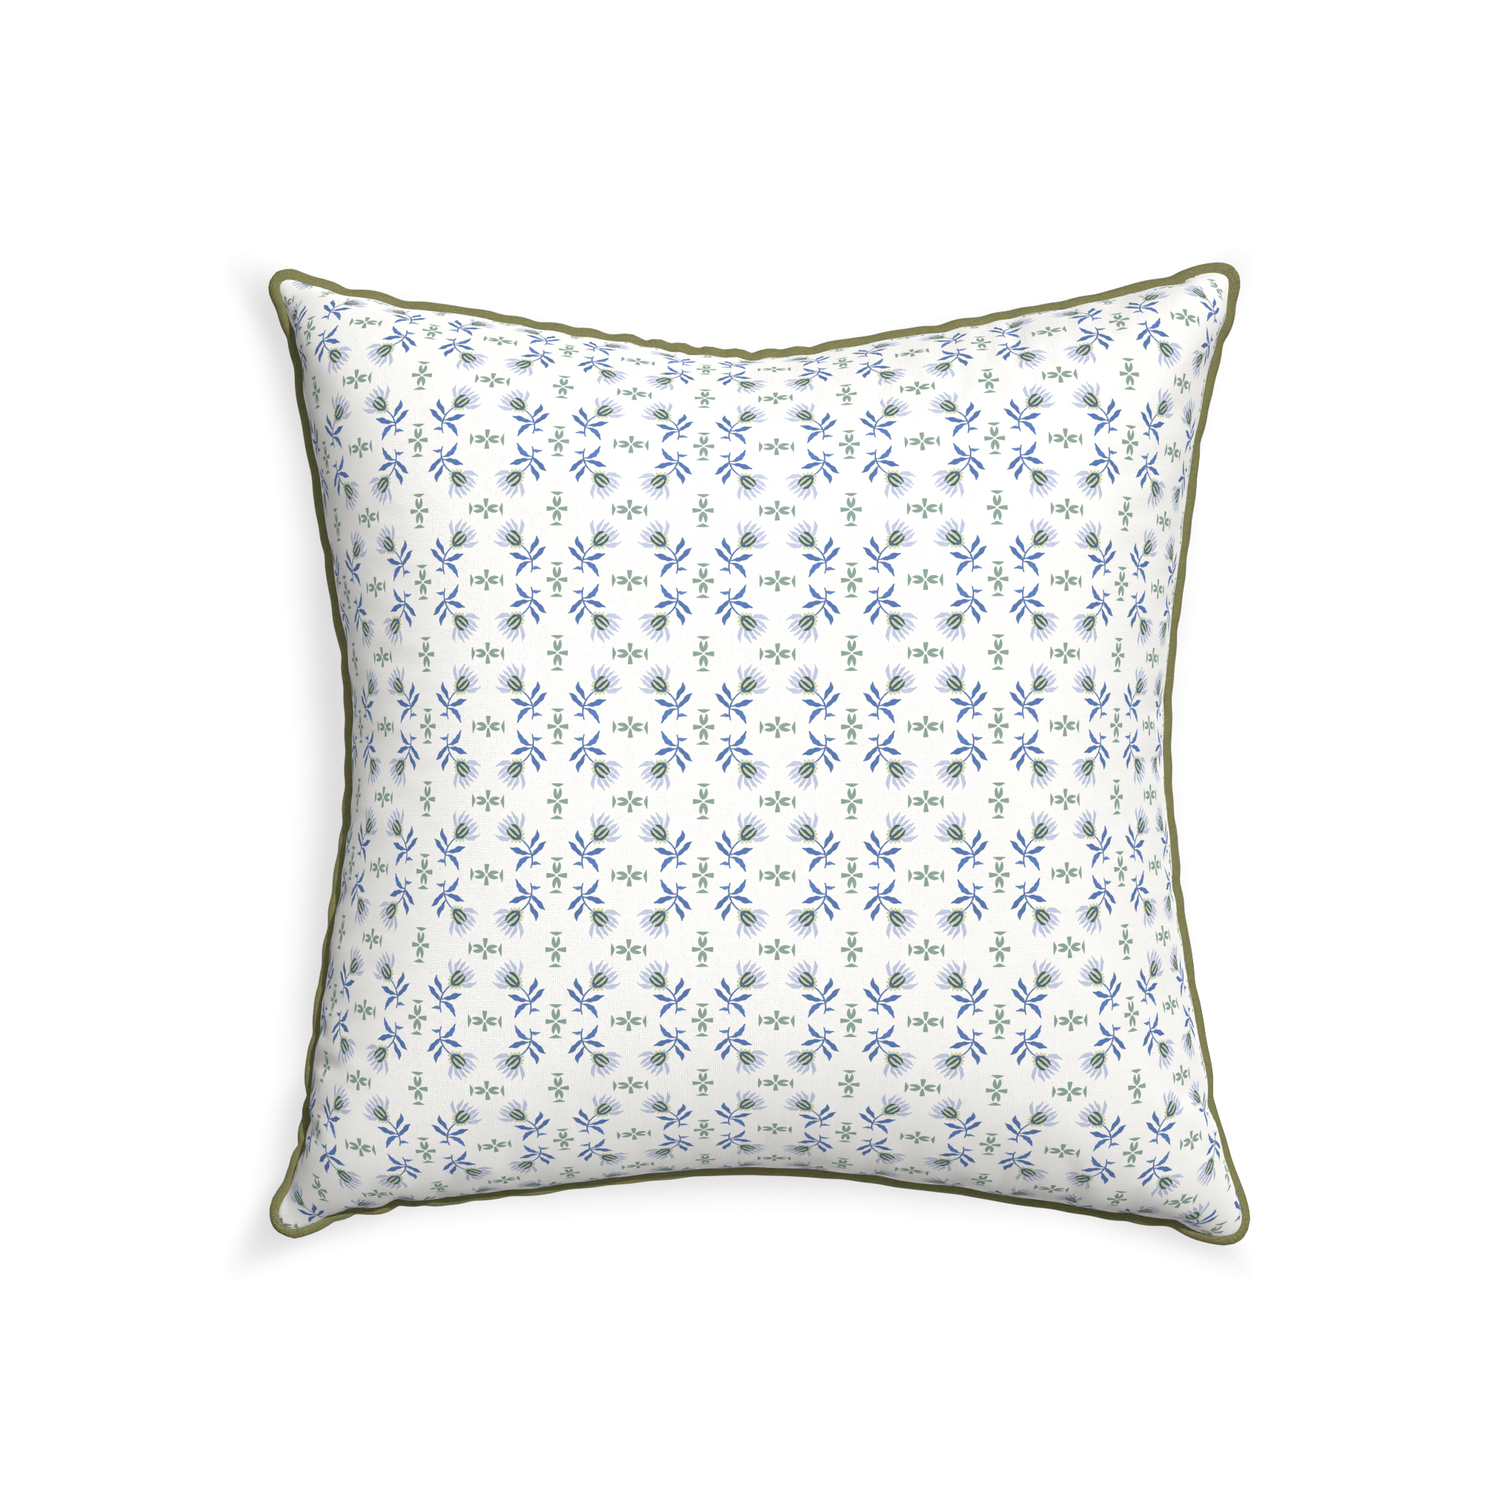 22-square lee custom pillow with moss piping on white background